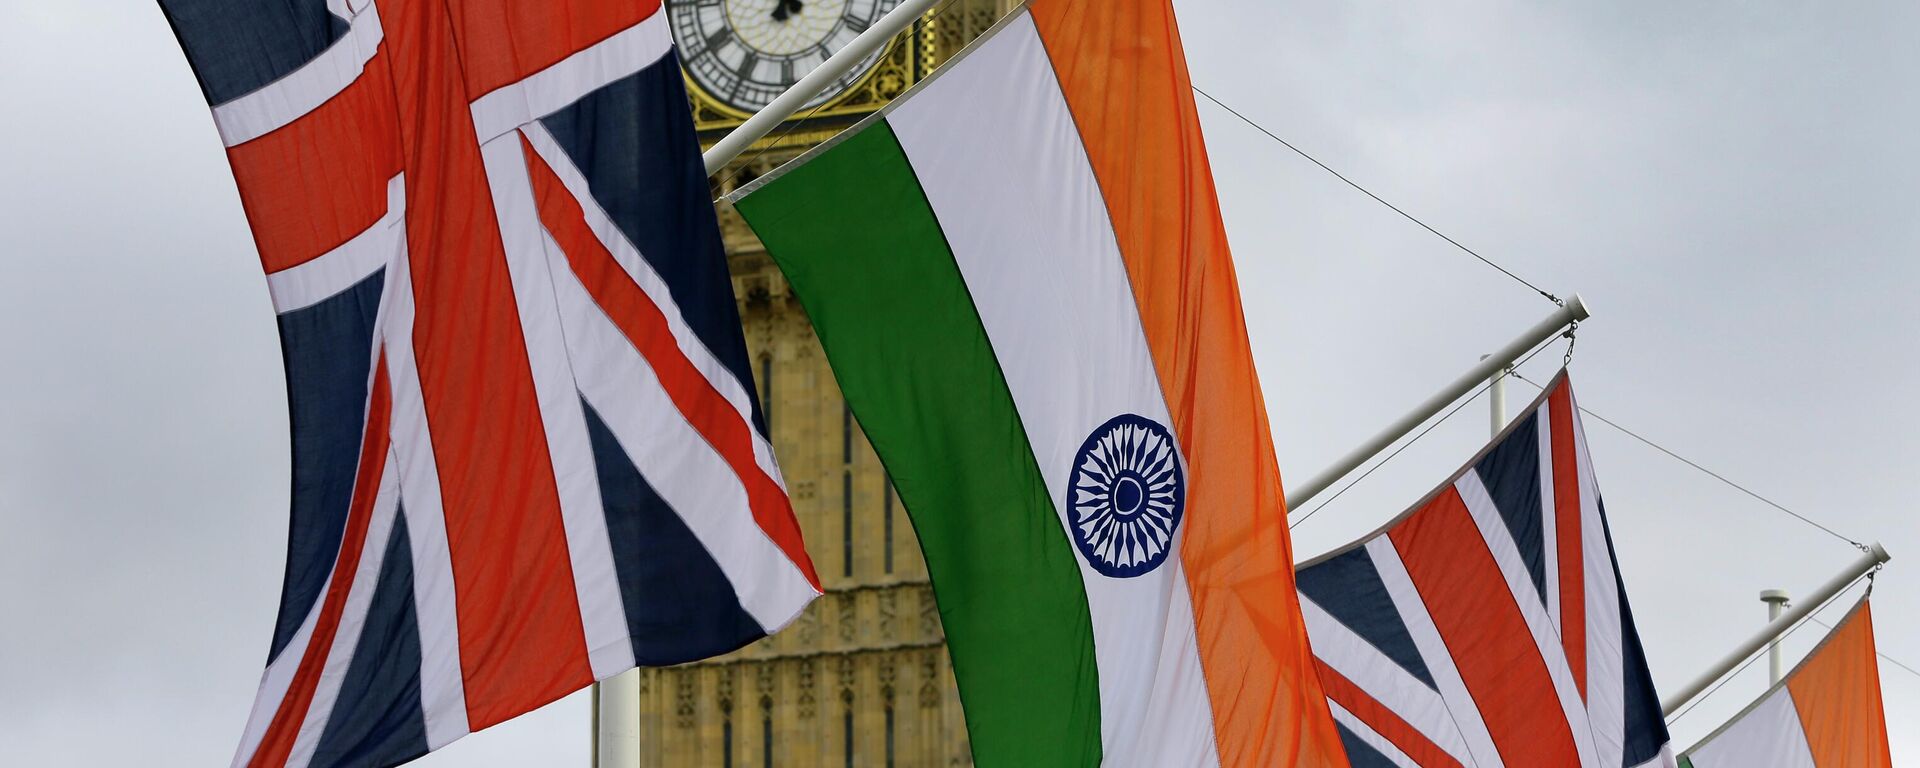 The Union and Indian flags hang near  the London landmark Big Ben  in Parliament Square in London, Thursday, Nov. 12, 2015 - Sputnik International, 1920, 07.10.2022